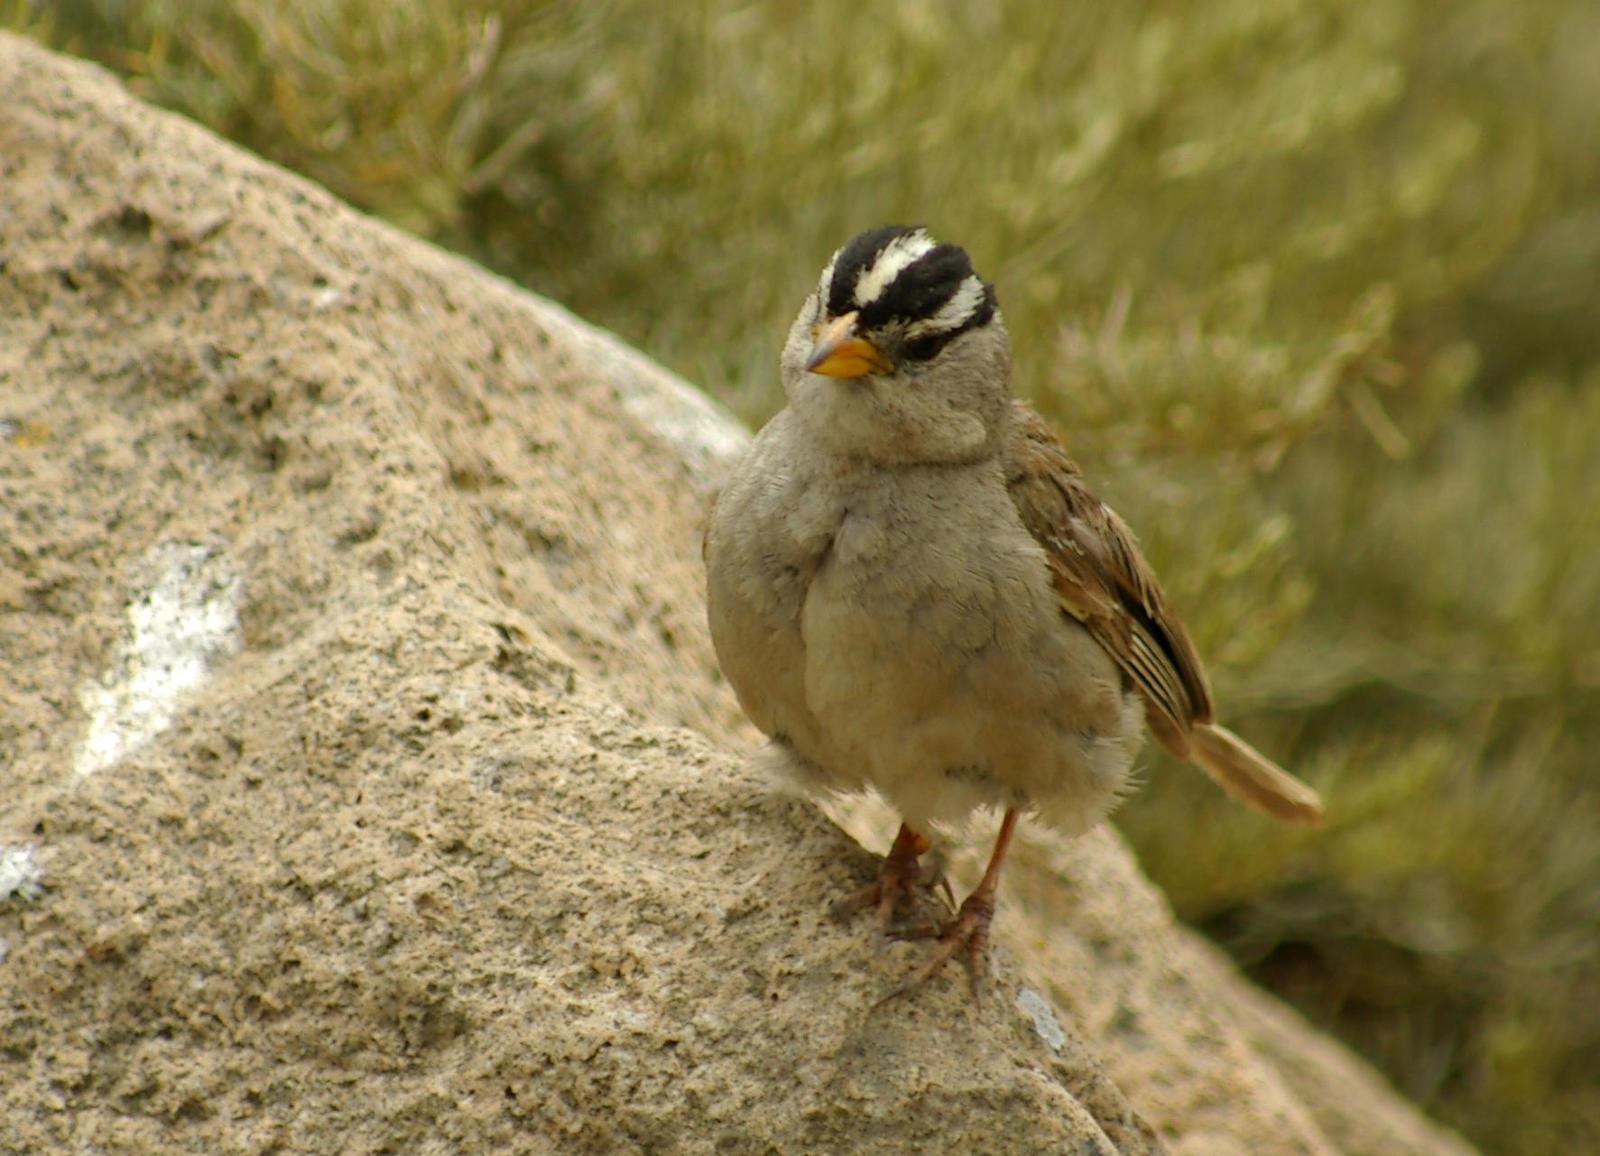 White-crowned Sparrow Photo by Kent Jensen